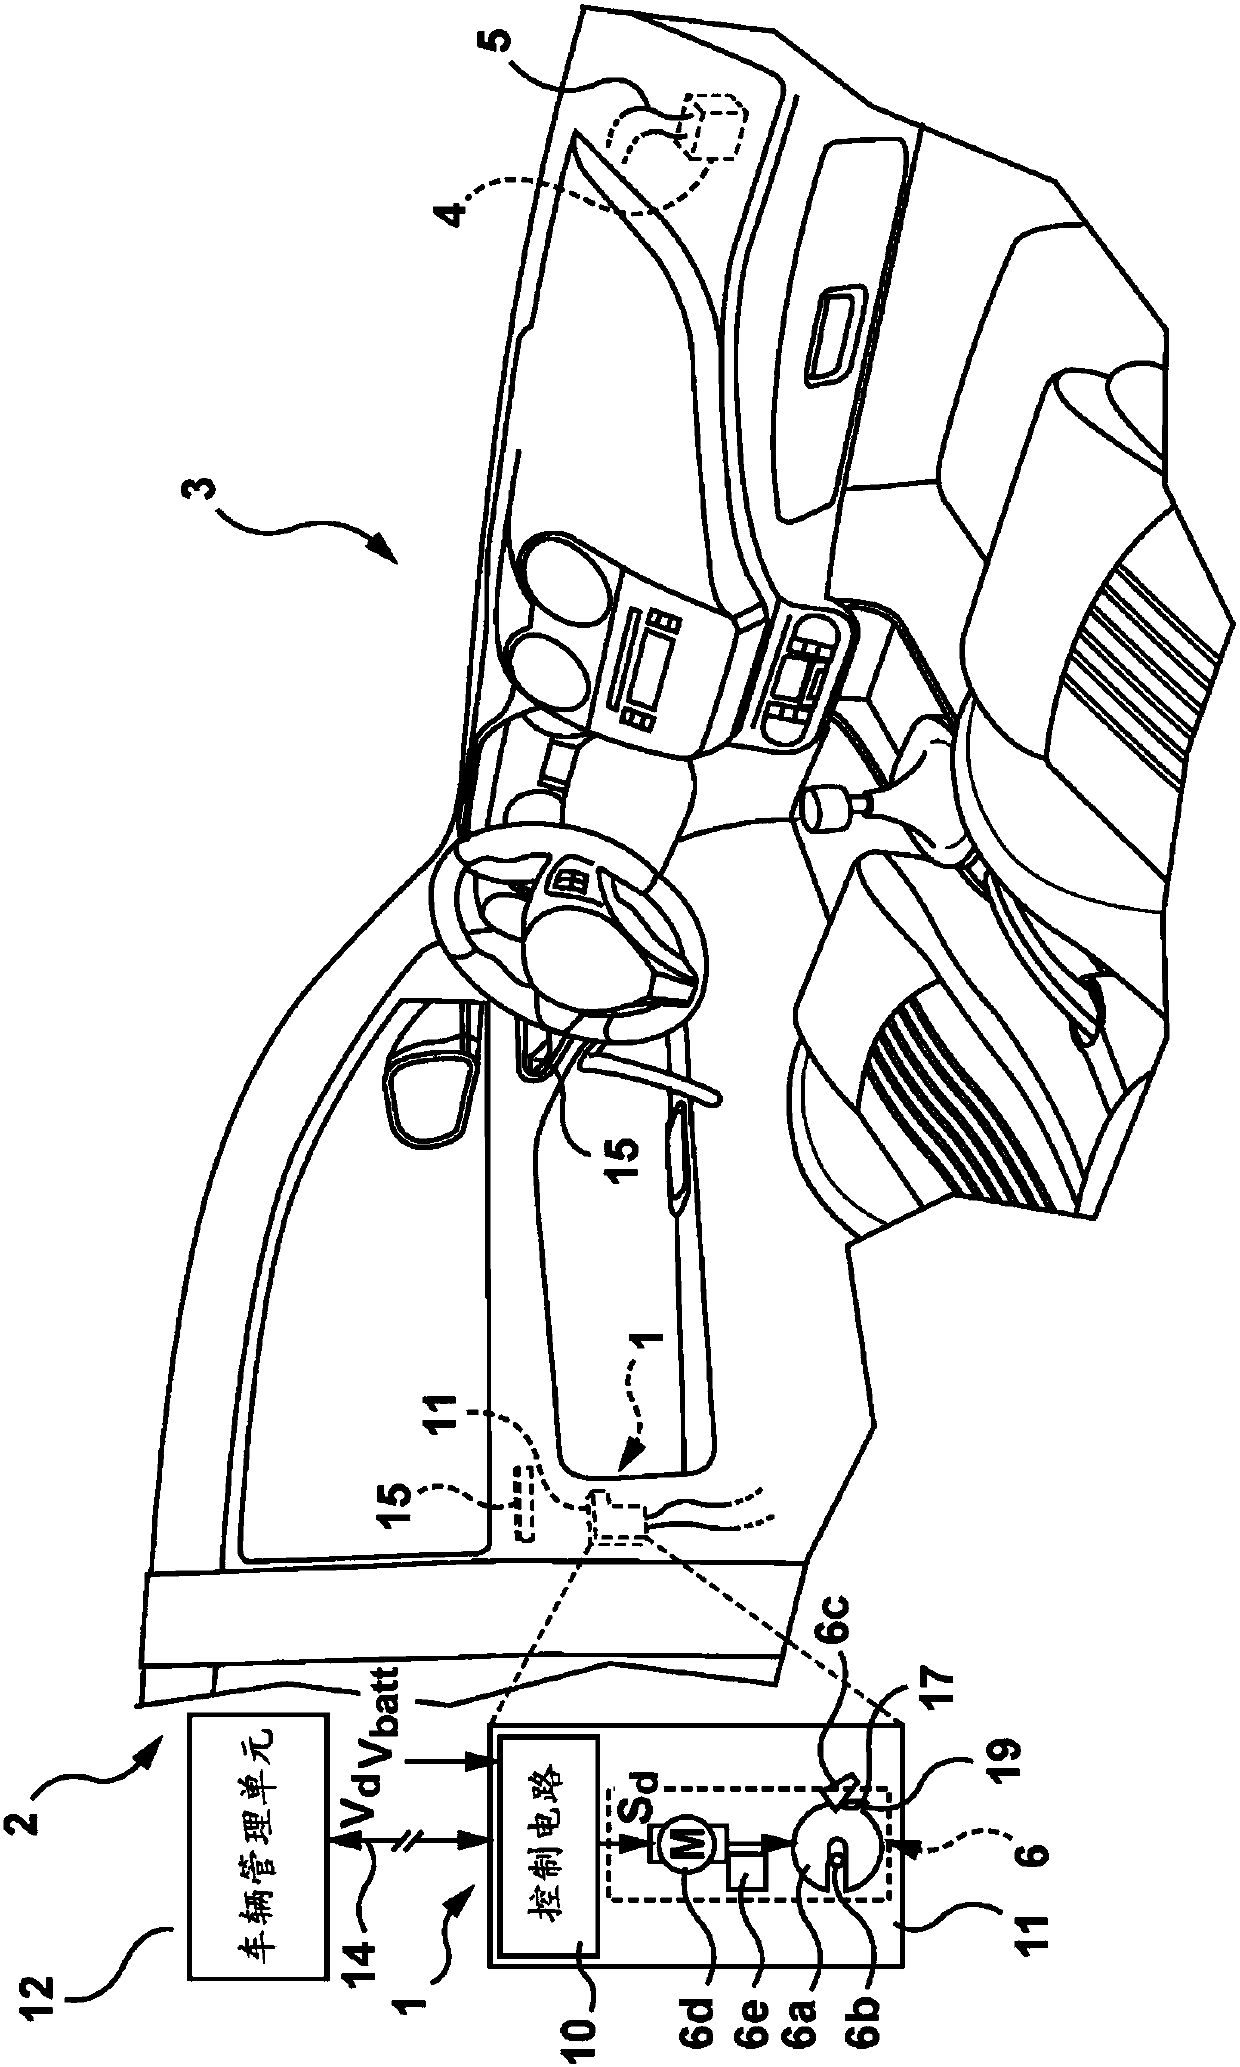 E-latch with motor reset